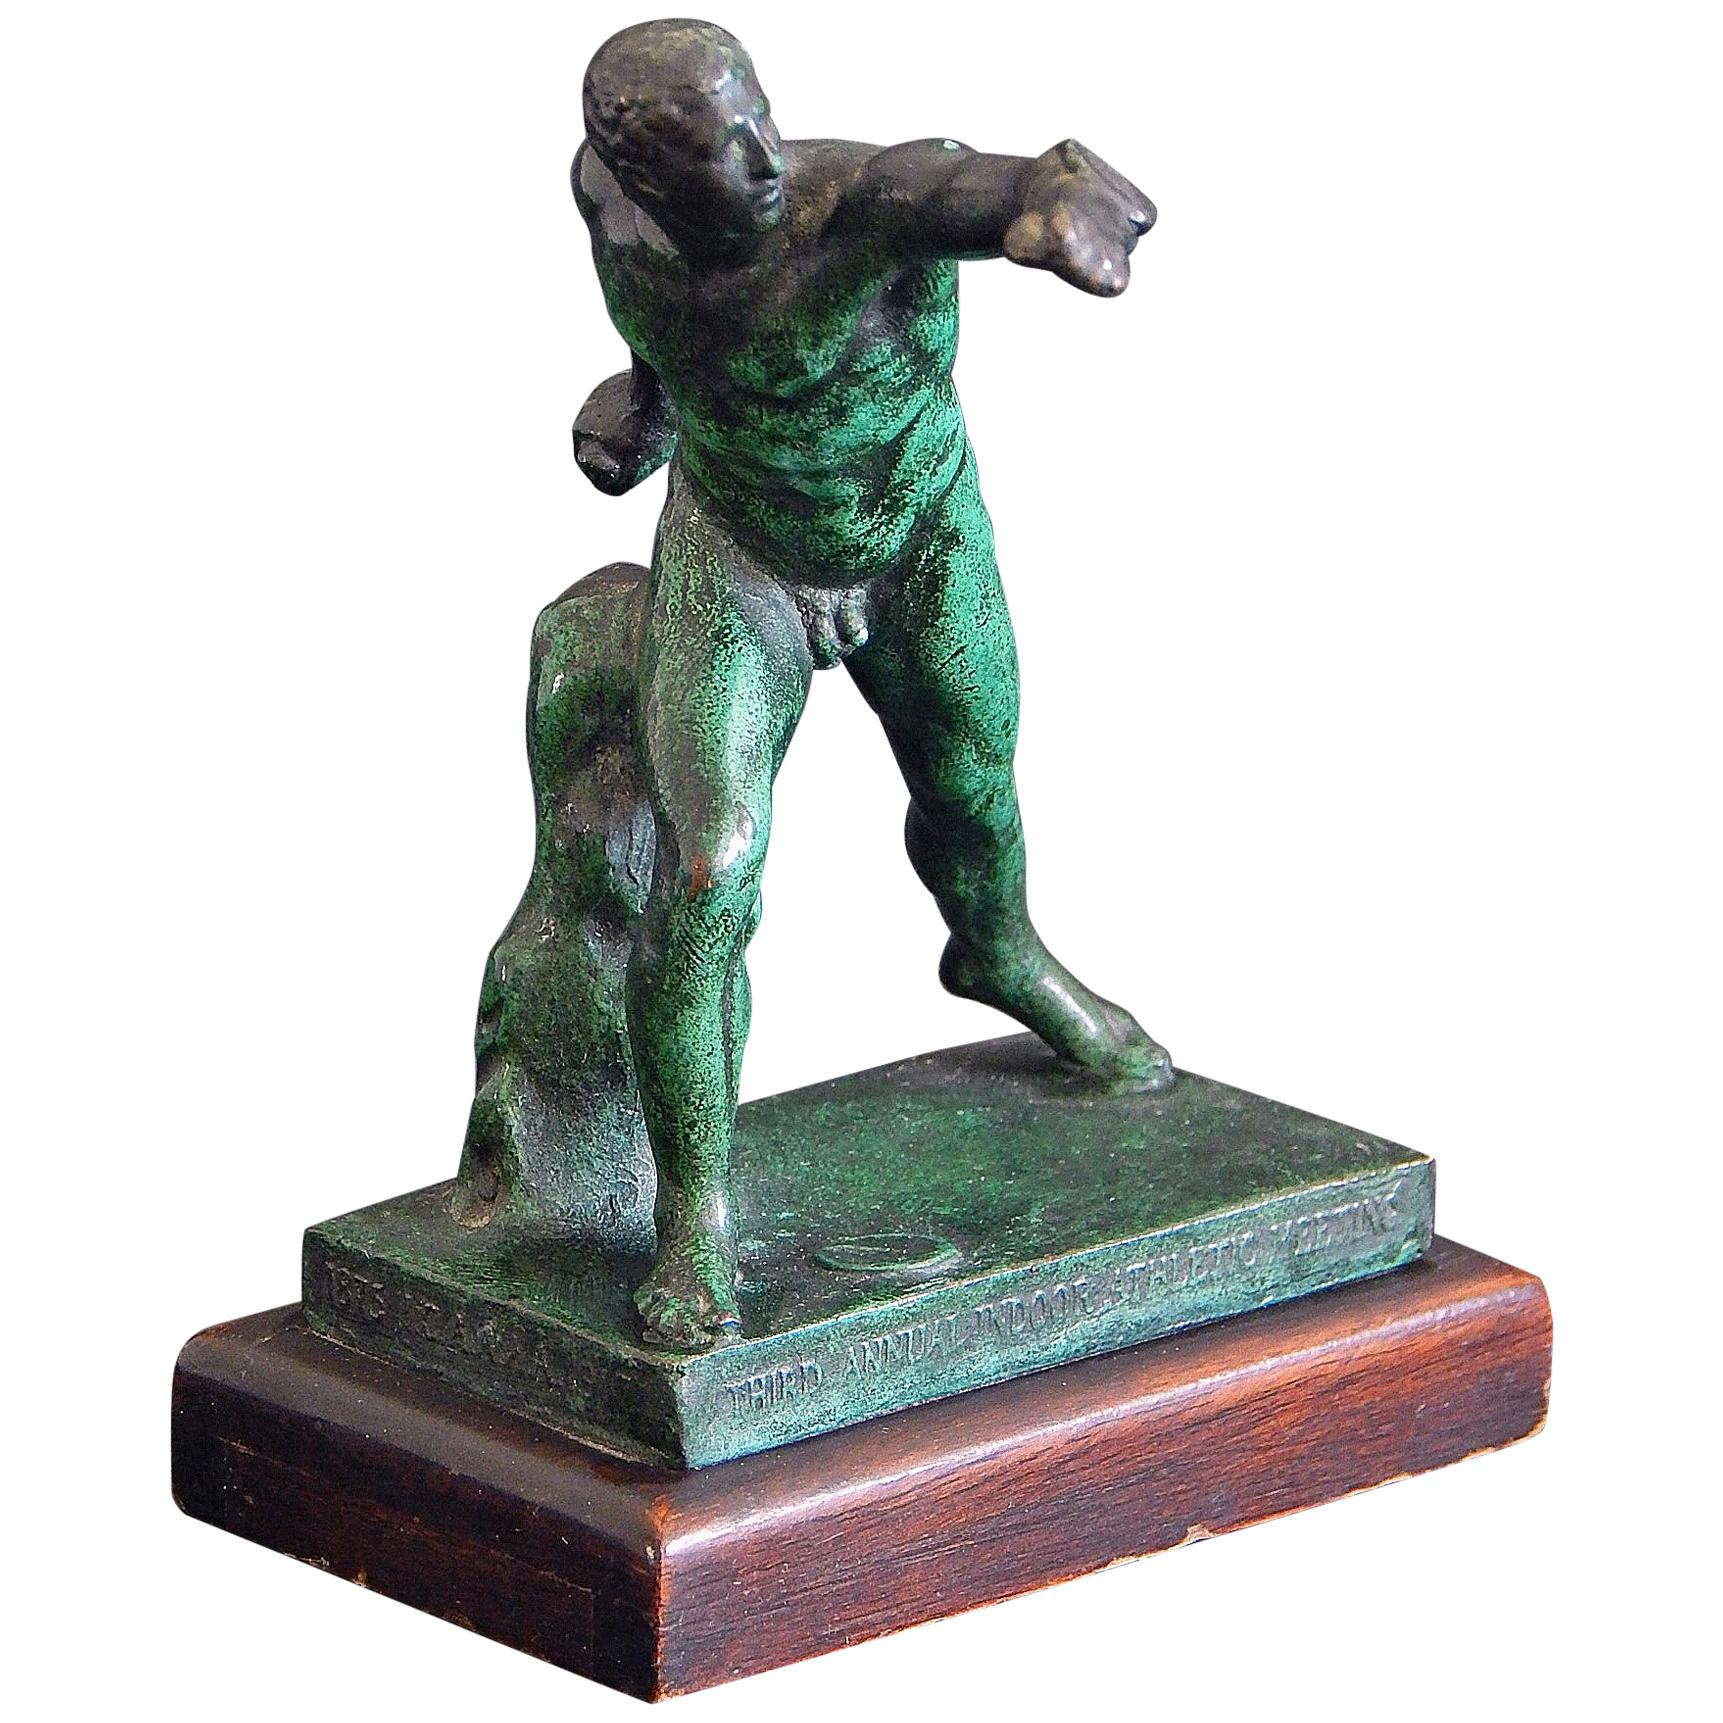 1917 Sports Trophy for IC4A by Roman Bronze Works, Two Lap Relay Race